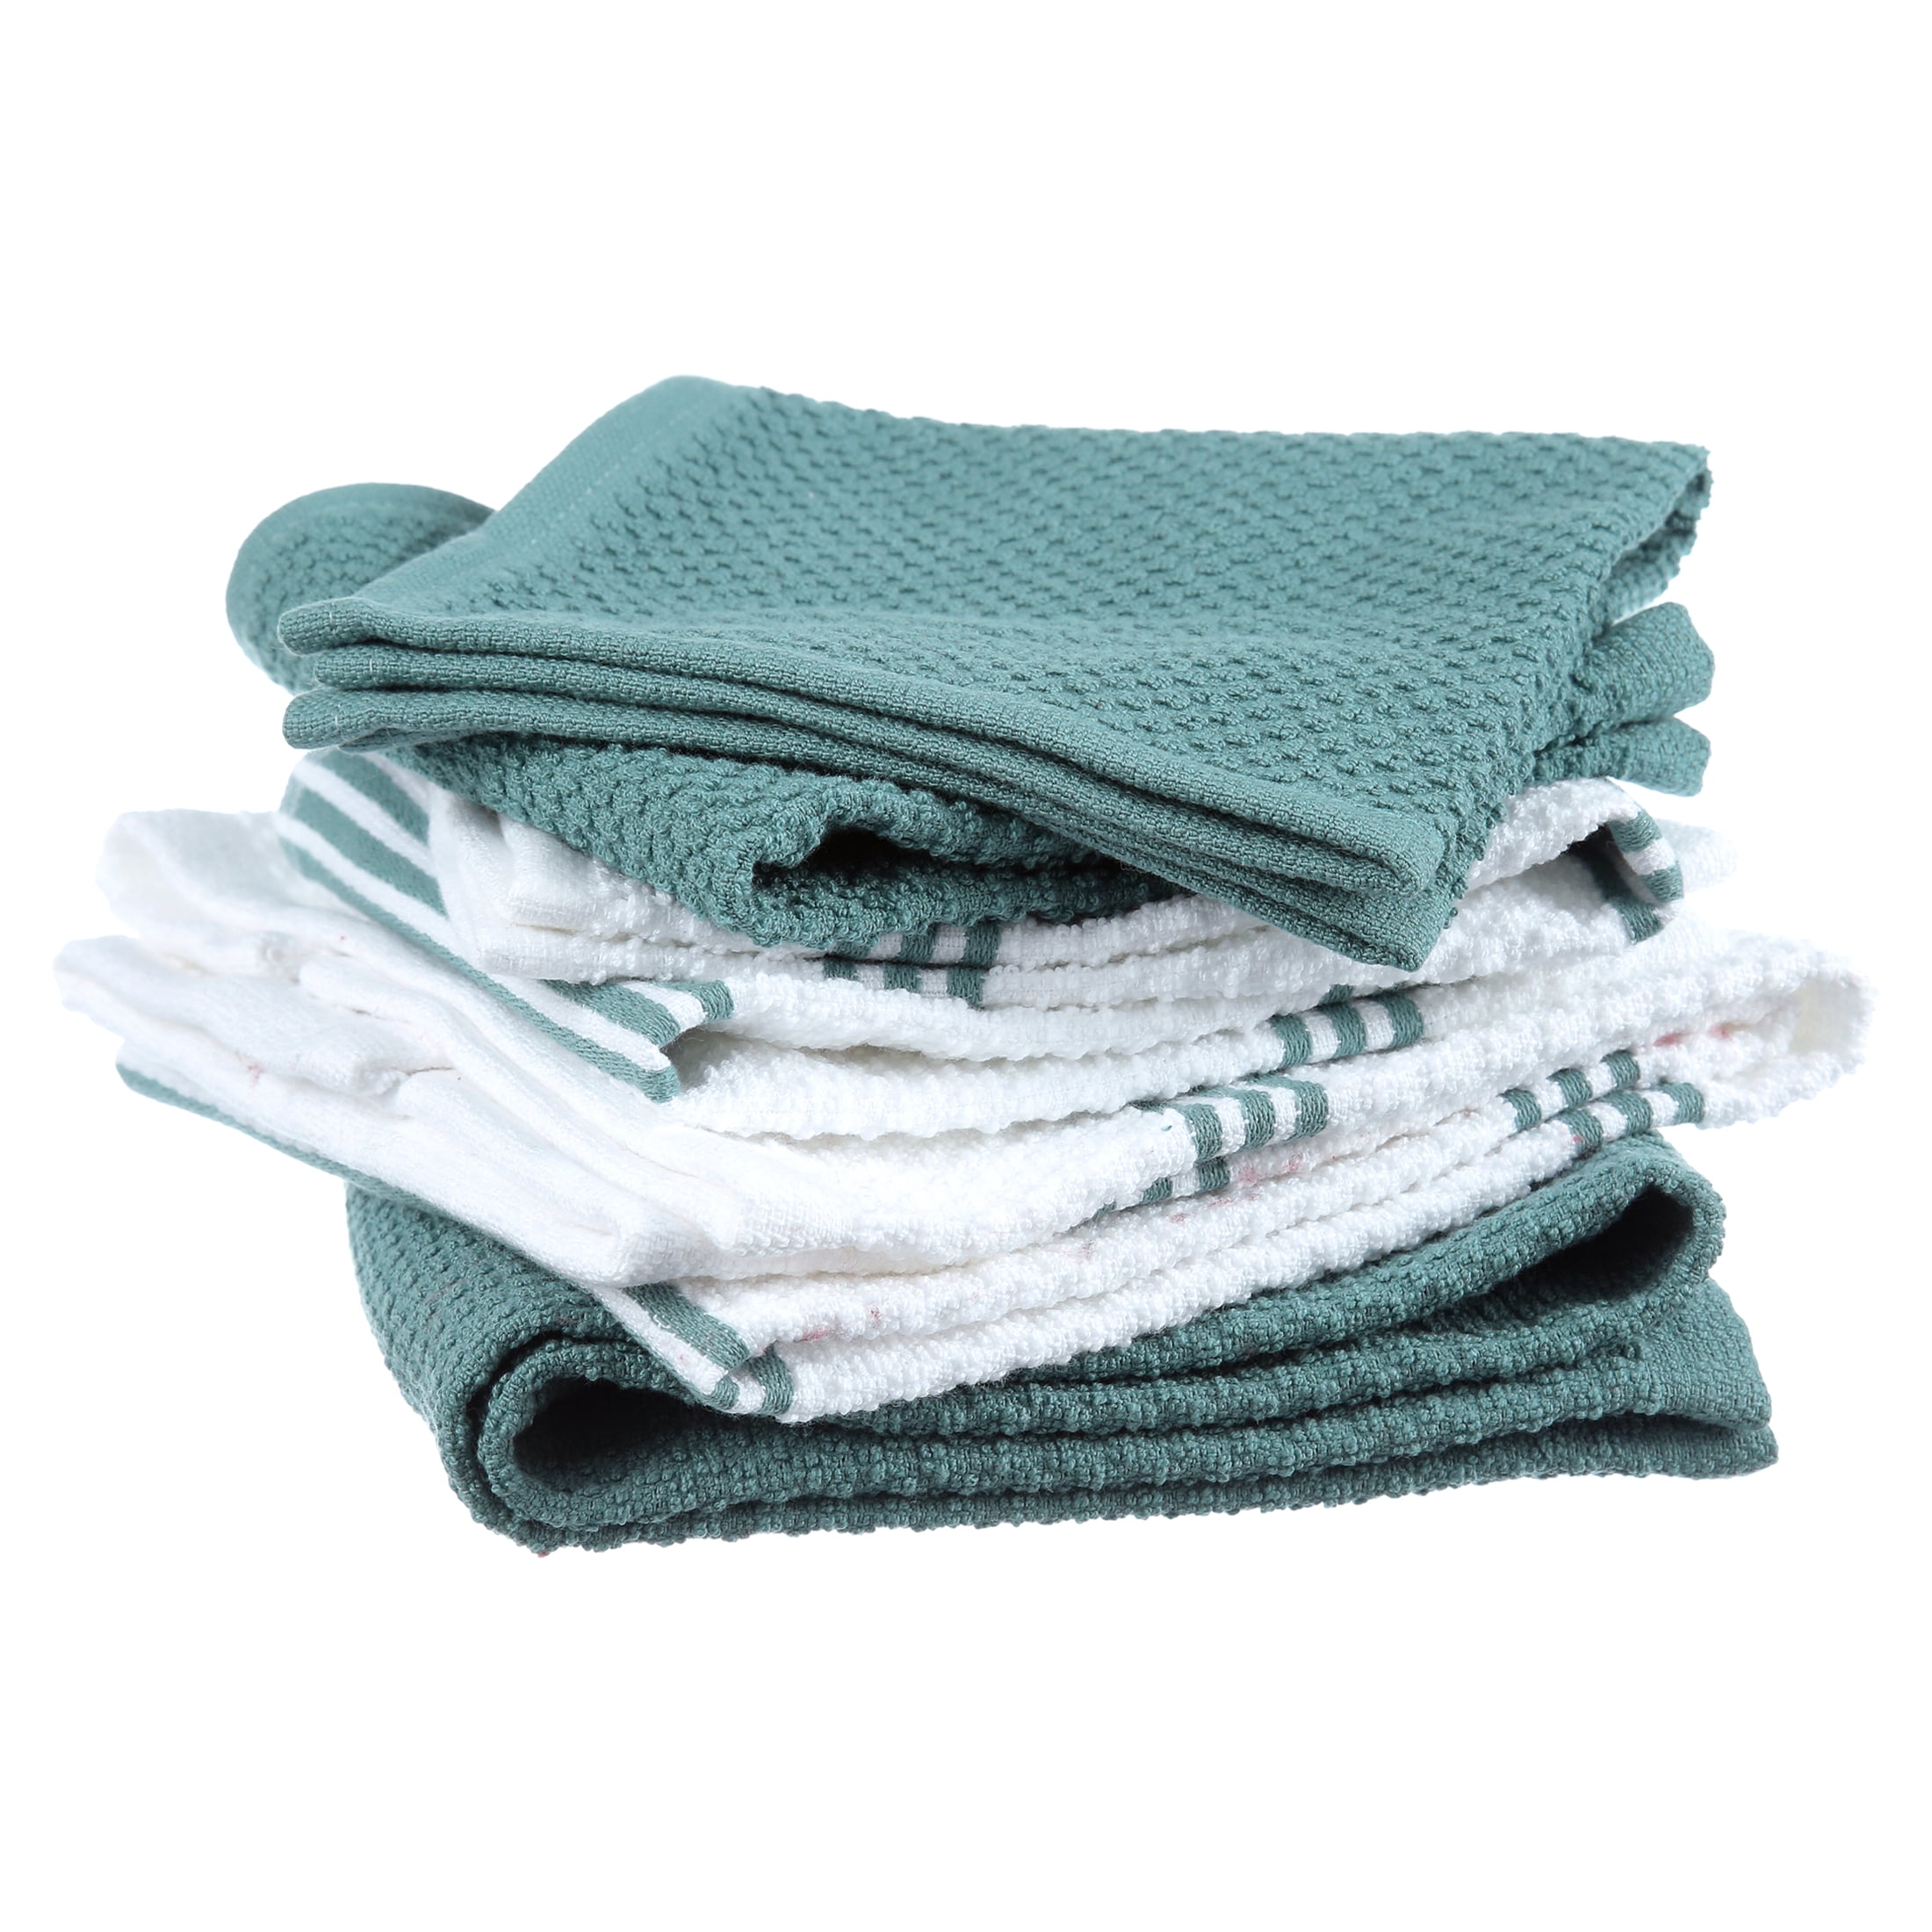 Sticky Toffee Terry Cotton Hand Towels Set for Bathroom, 2 Pack, Soft and Absorbent, 500 gsm, 16 in x 28 in, Blue, Size: 2 Piece Hand Towels